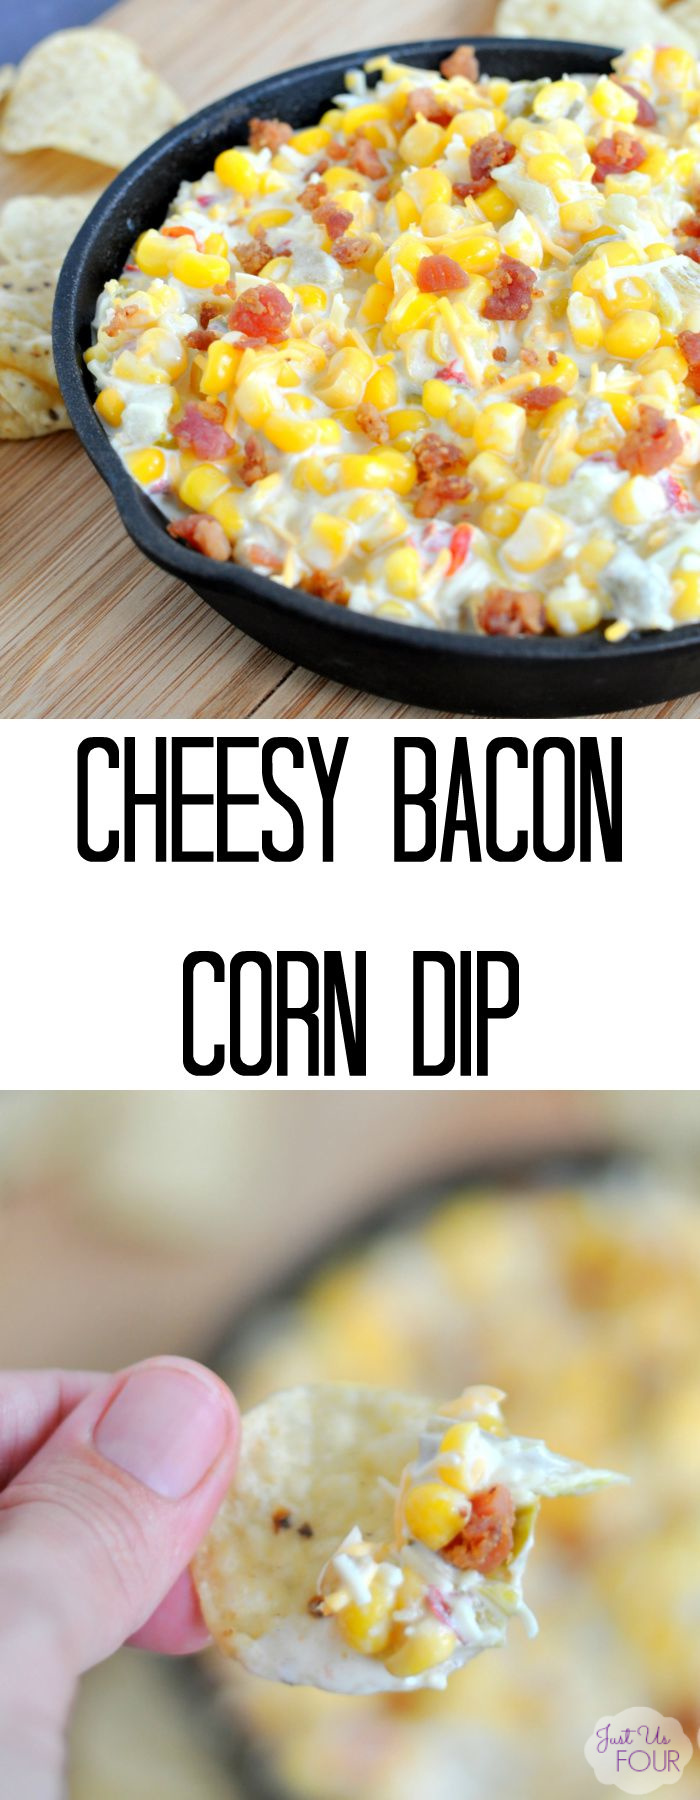 This bacon corn dip is the ultimate in party foods!